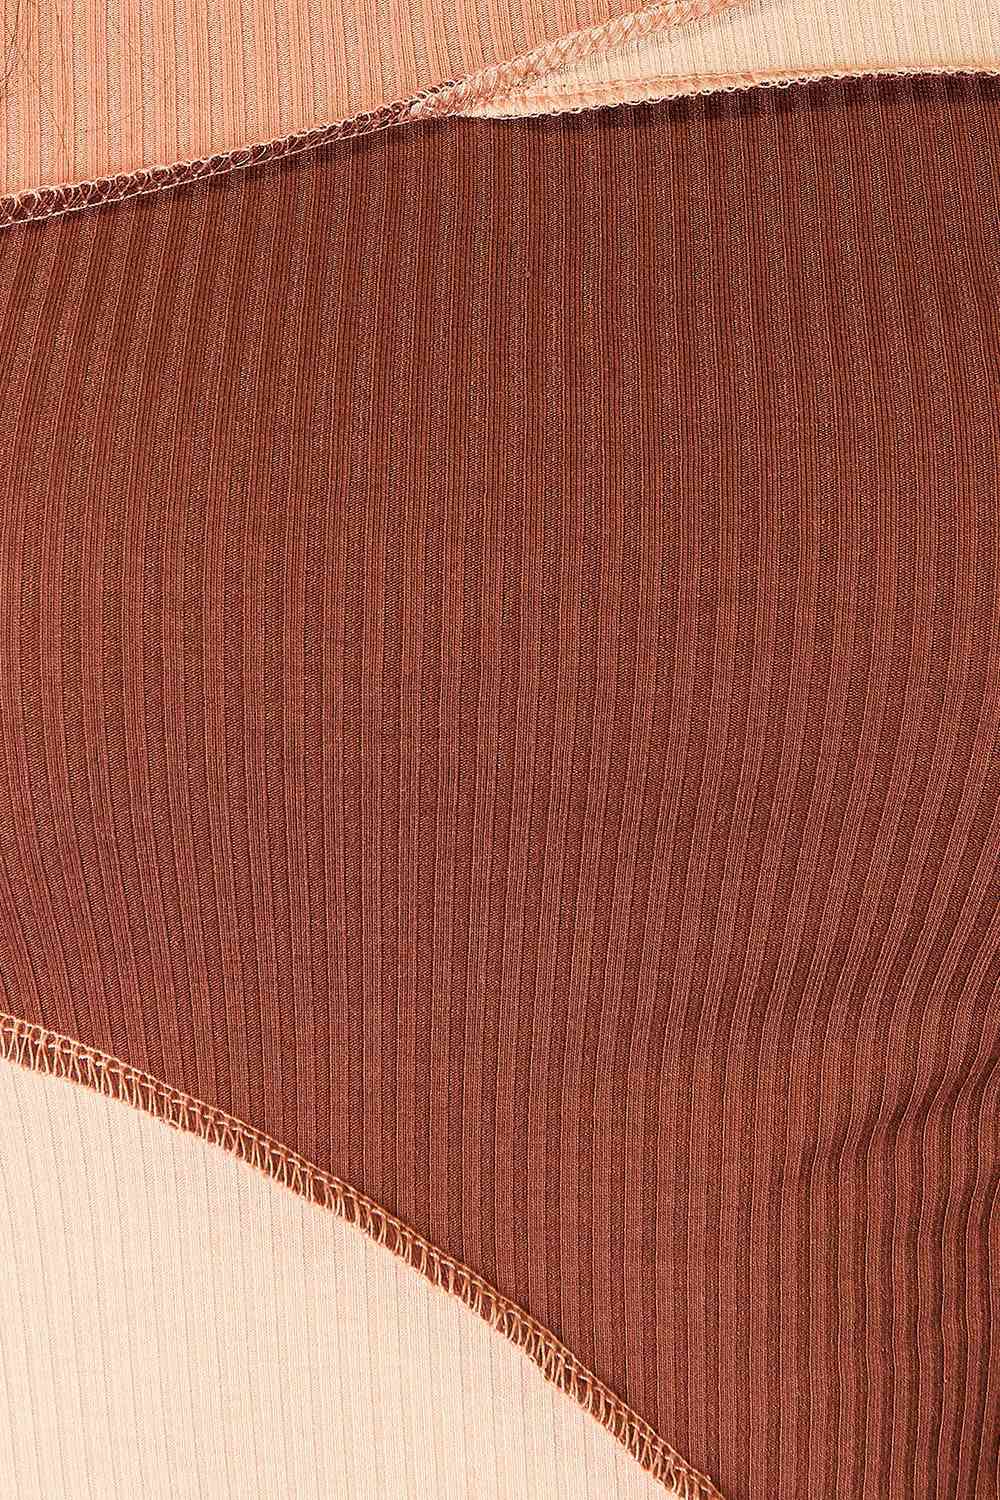 Saddle Brown Double Take Color Block Exposed Seam Long Sleeve Top Sentient Beauty Fashions Apparel & Accessories